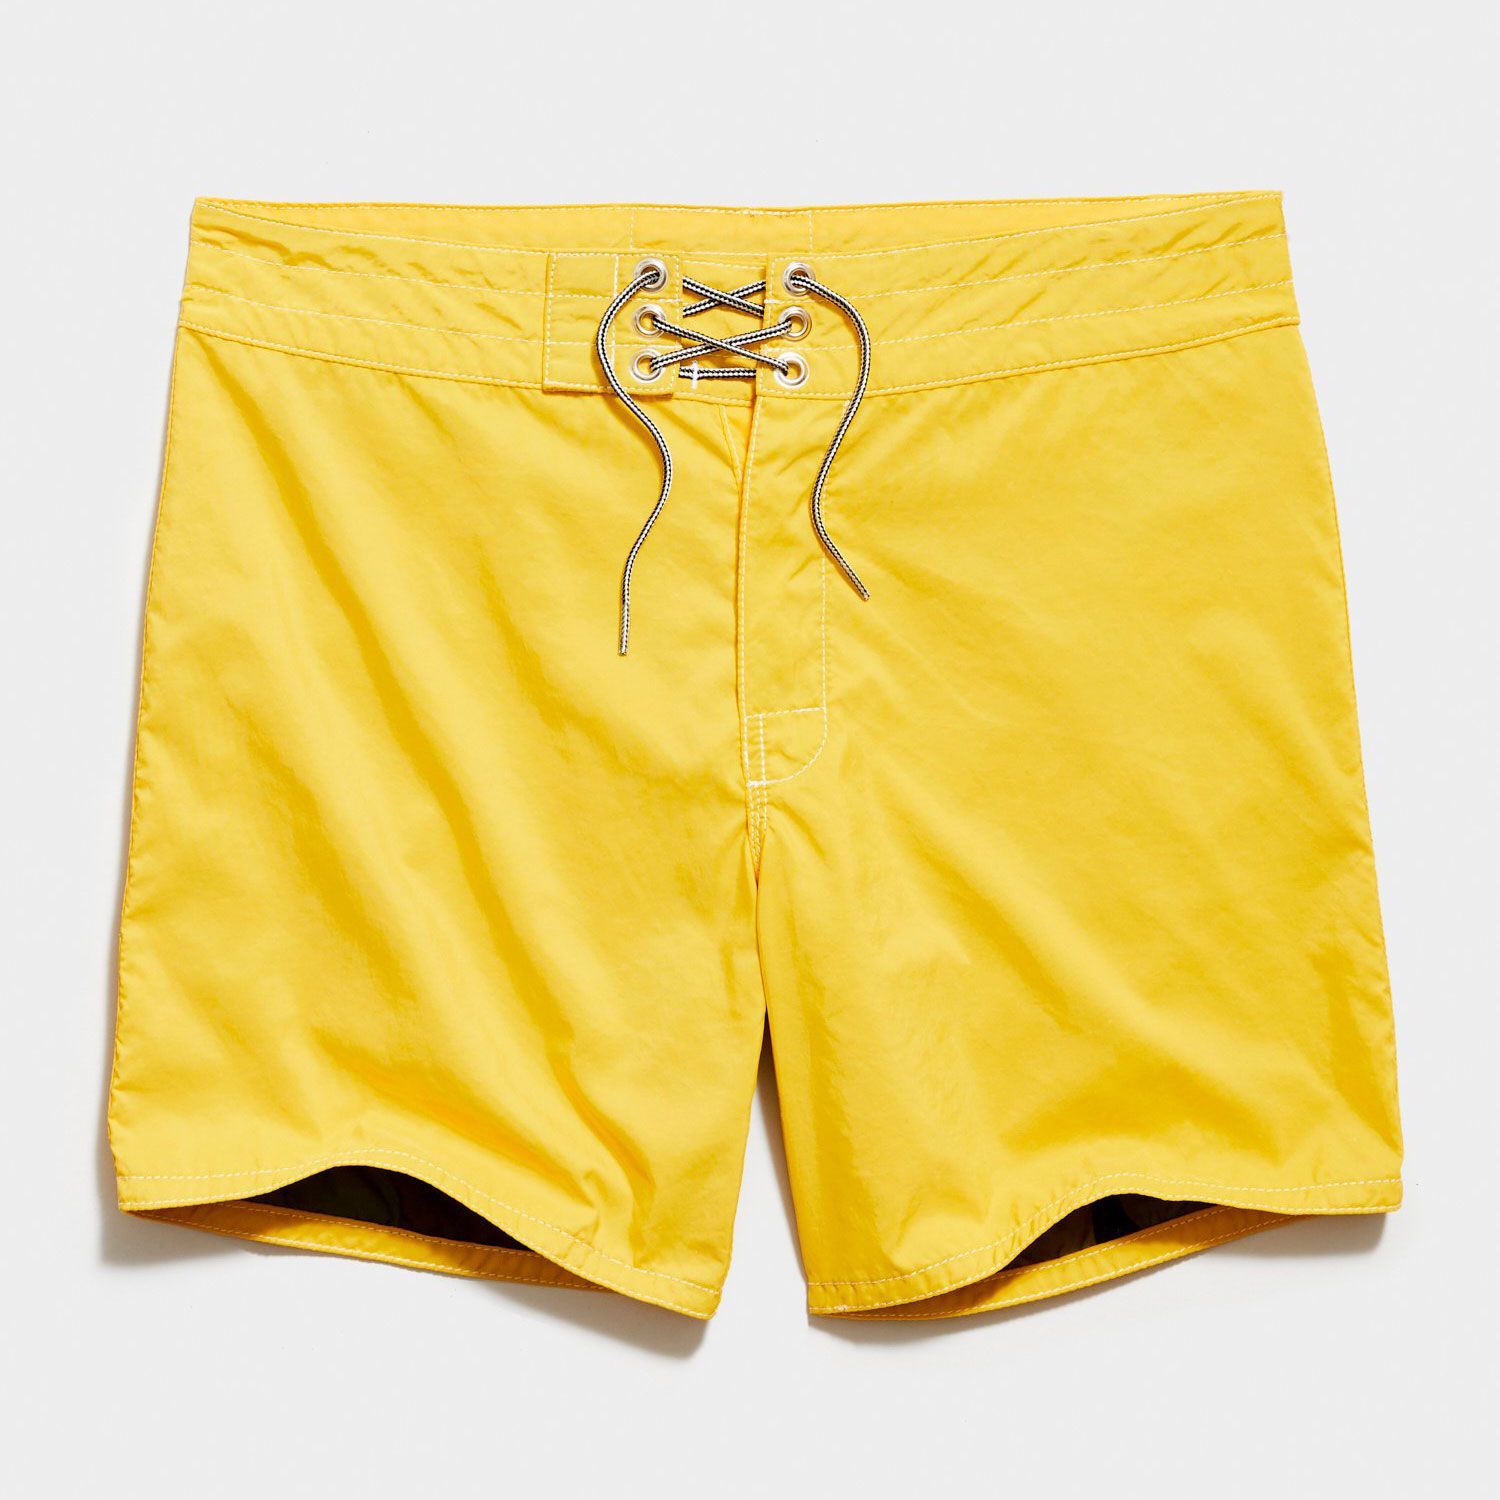 Todd Snyder Birdwell Bord Shorts - Where to Buy, Price, Details